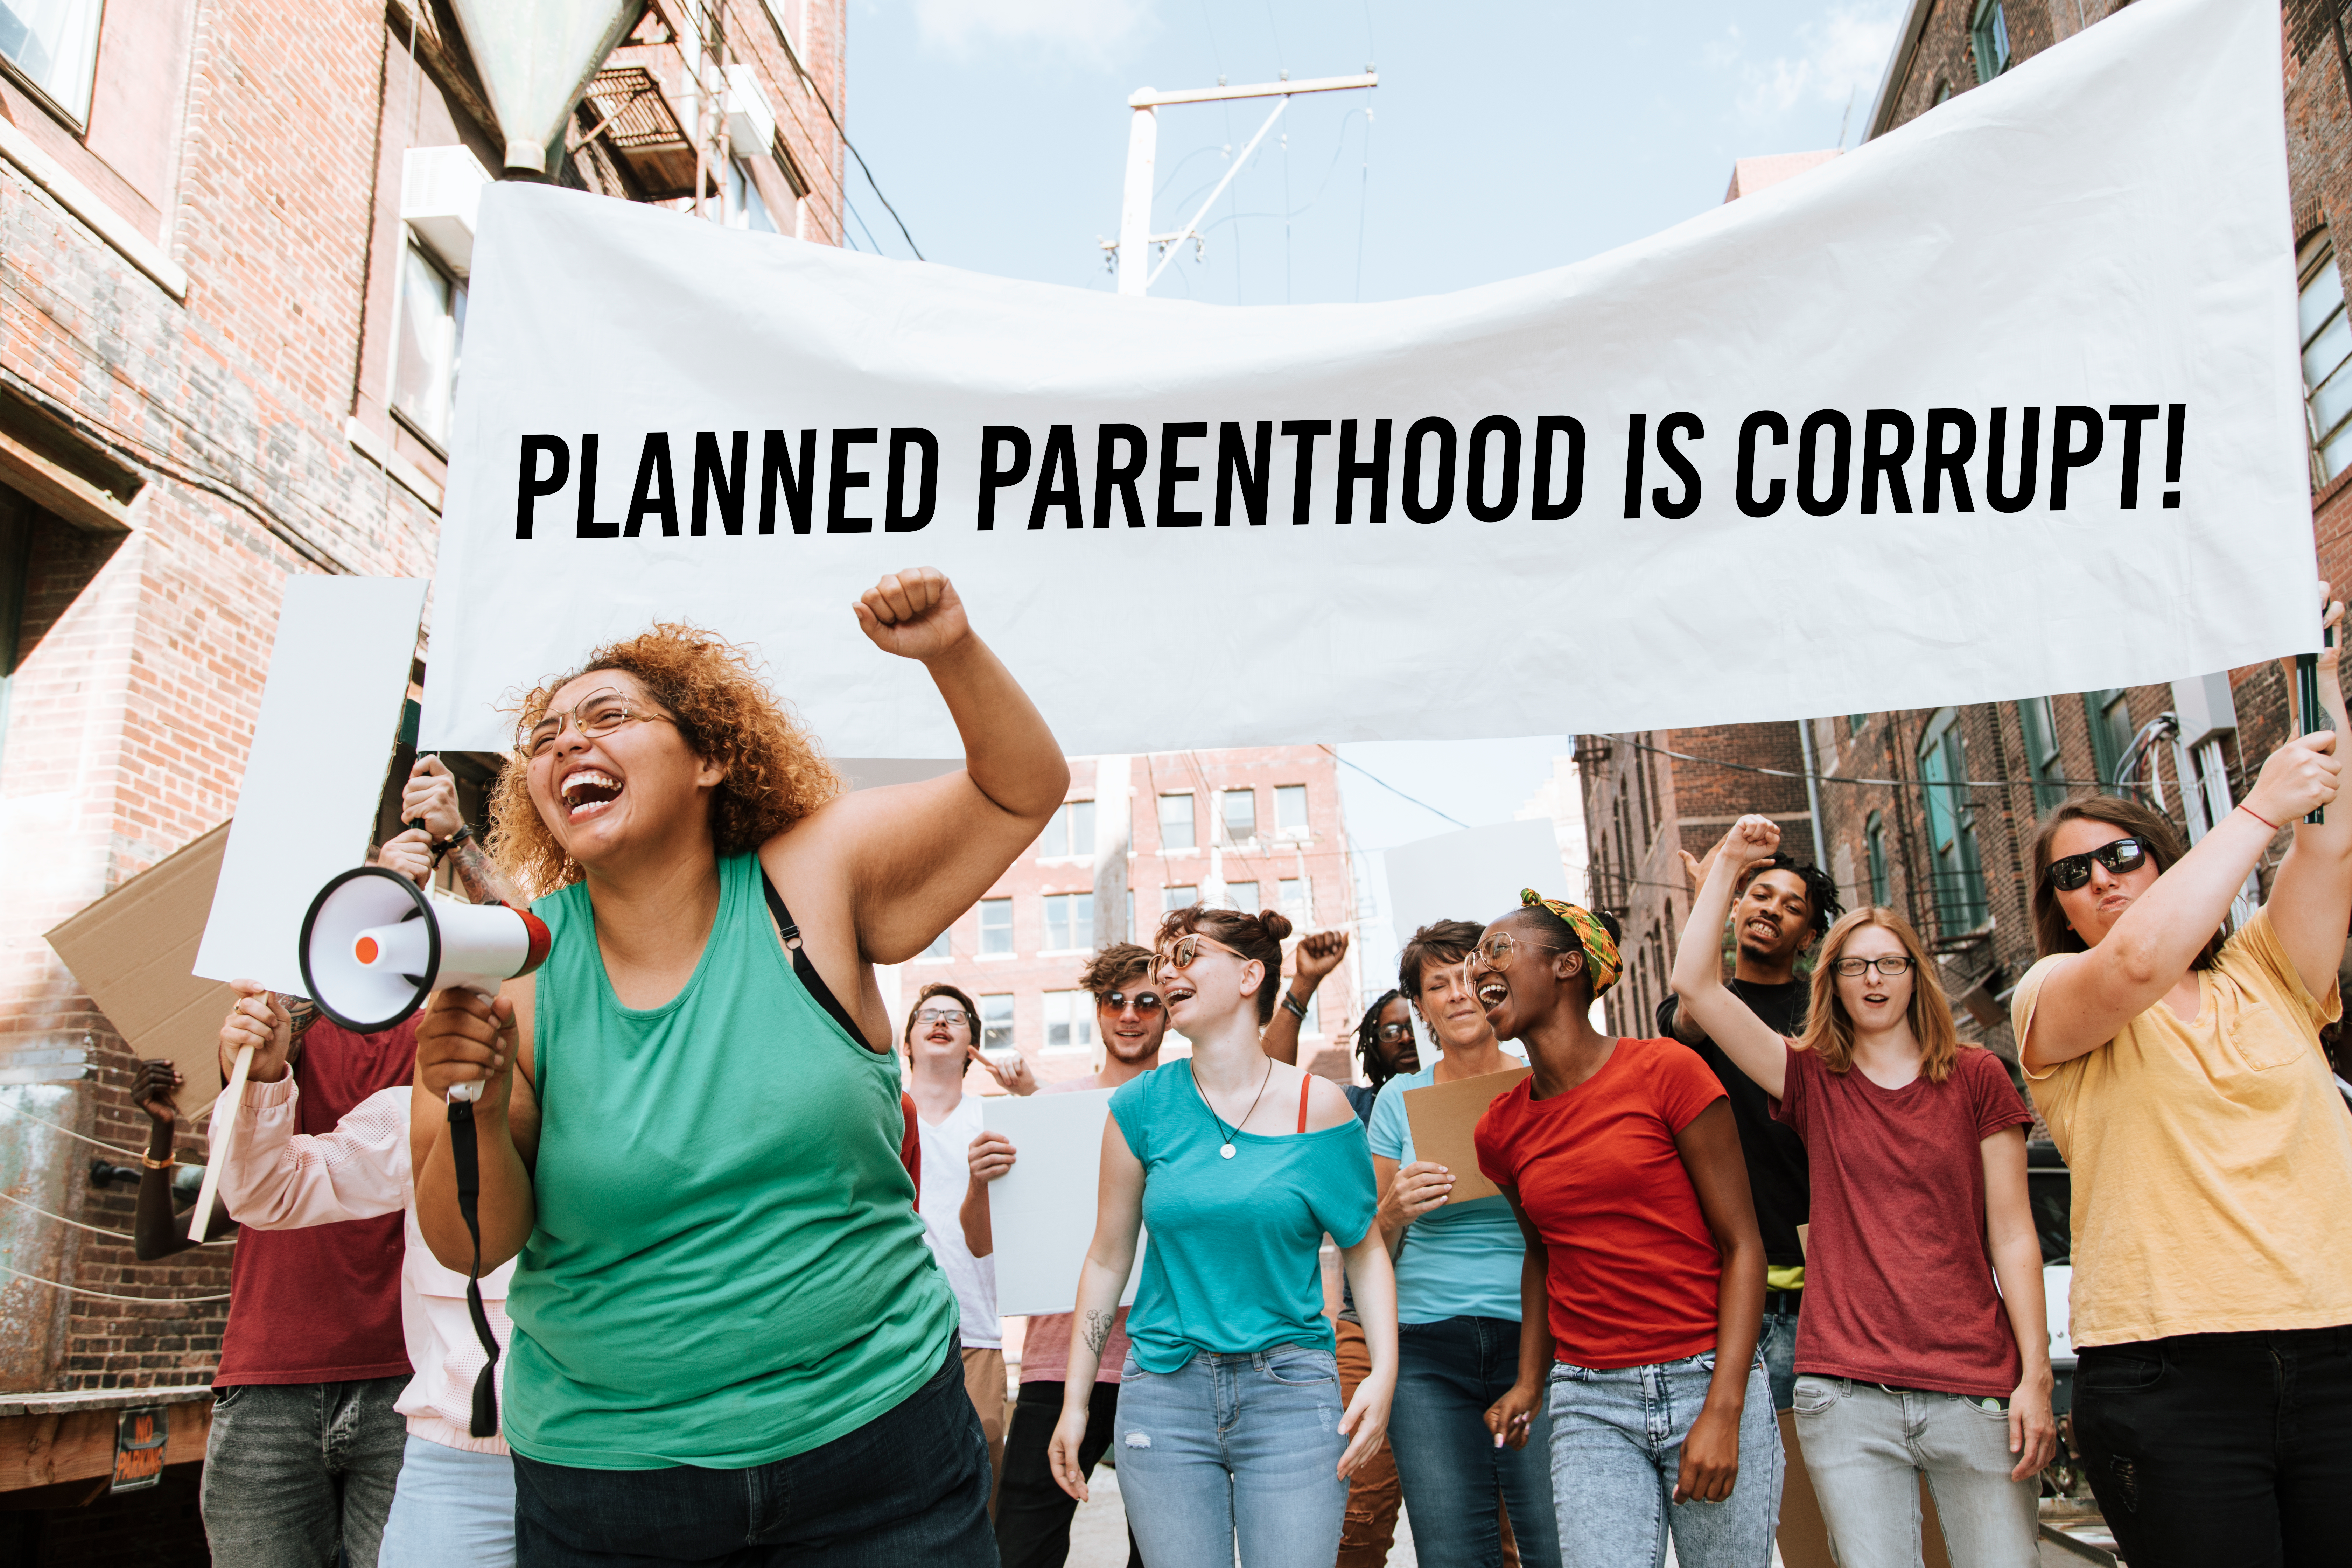 Group of women marching with "Planned Parenthood is Corrupt" sign